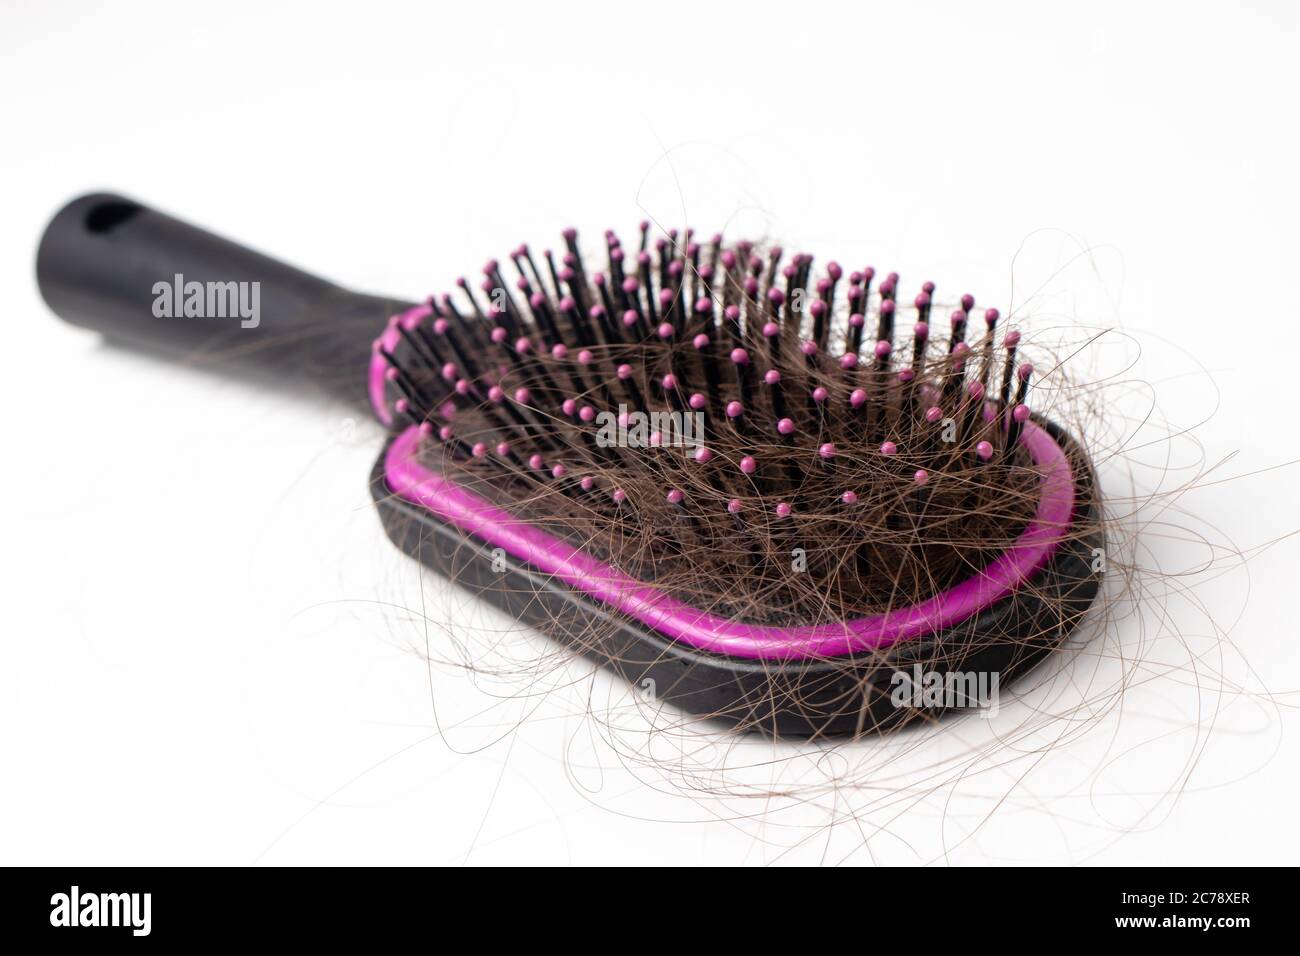 Hair loss on a comb on a white background. Baldness. Stock Photo